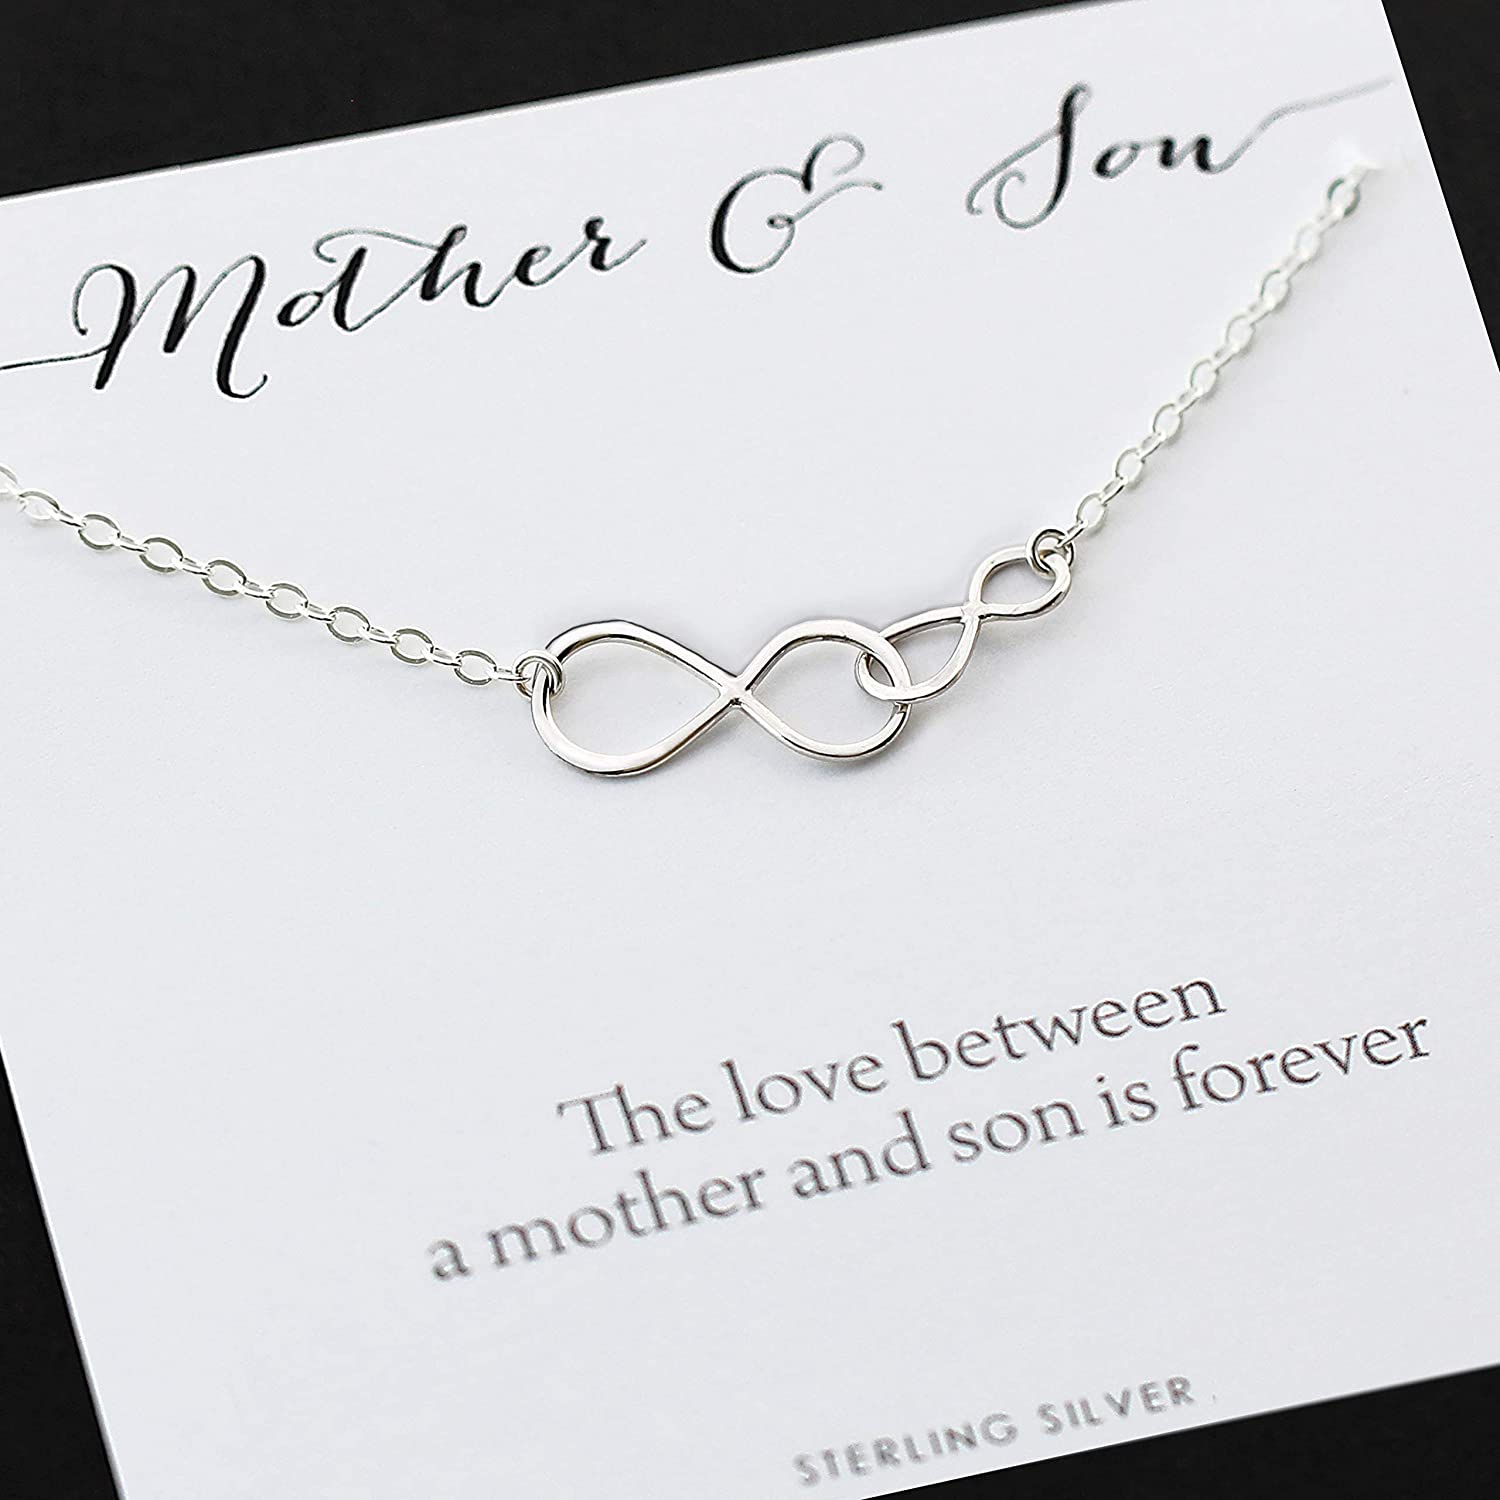 Mother and Son Necklace Mothers Day Birthstone Necklace Mother Son Gift Mother  Son Jewelry 04-ne-mother & Son - Etsy